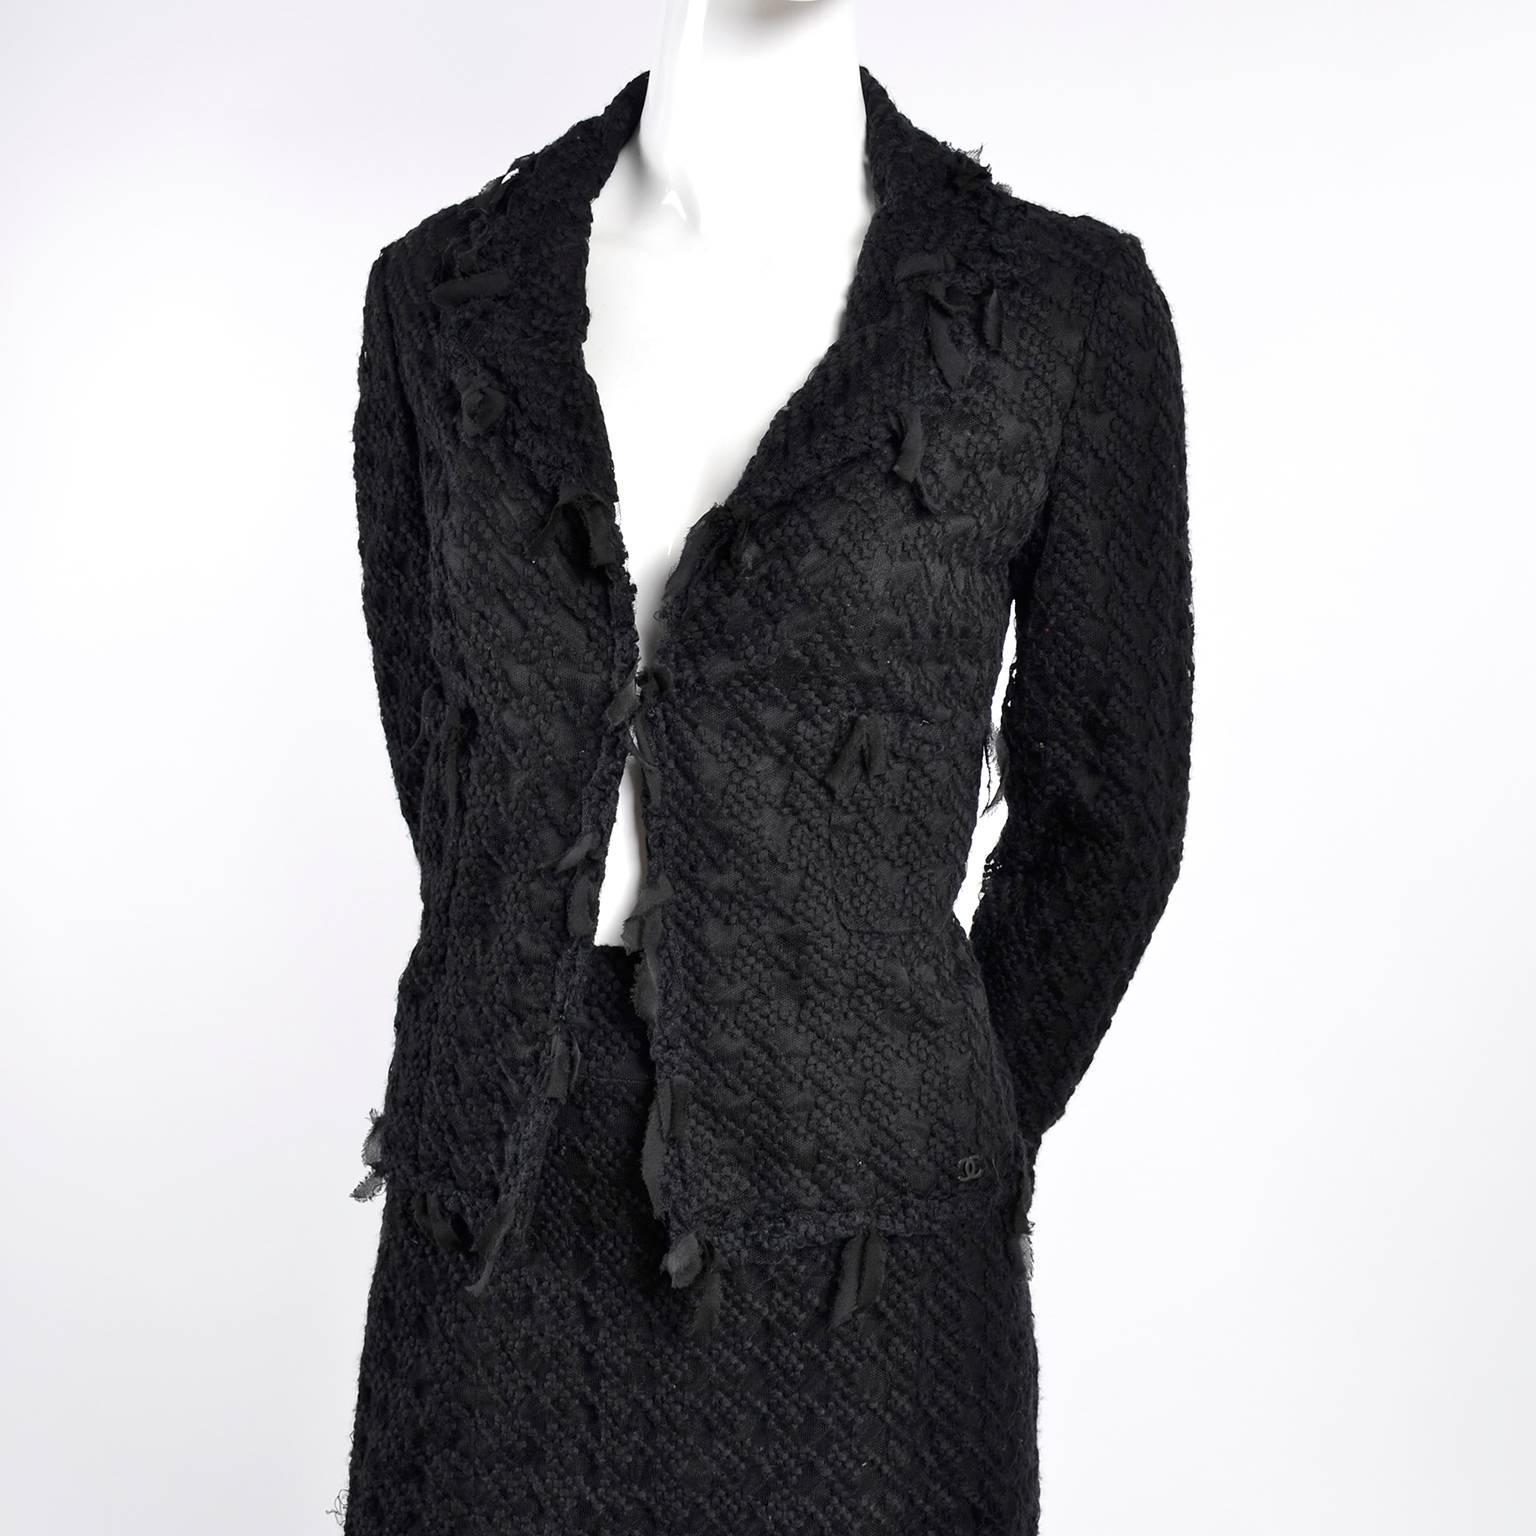 This is a highly desirable and coveted 2 piece Chanel skirt suit with fine embroidered mesh overlay over black wool tweed and ribbon trim. The jacket is labeled a size 40 and is lined in black silk. The jacket has the Chanel camellia buttons at the